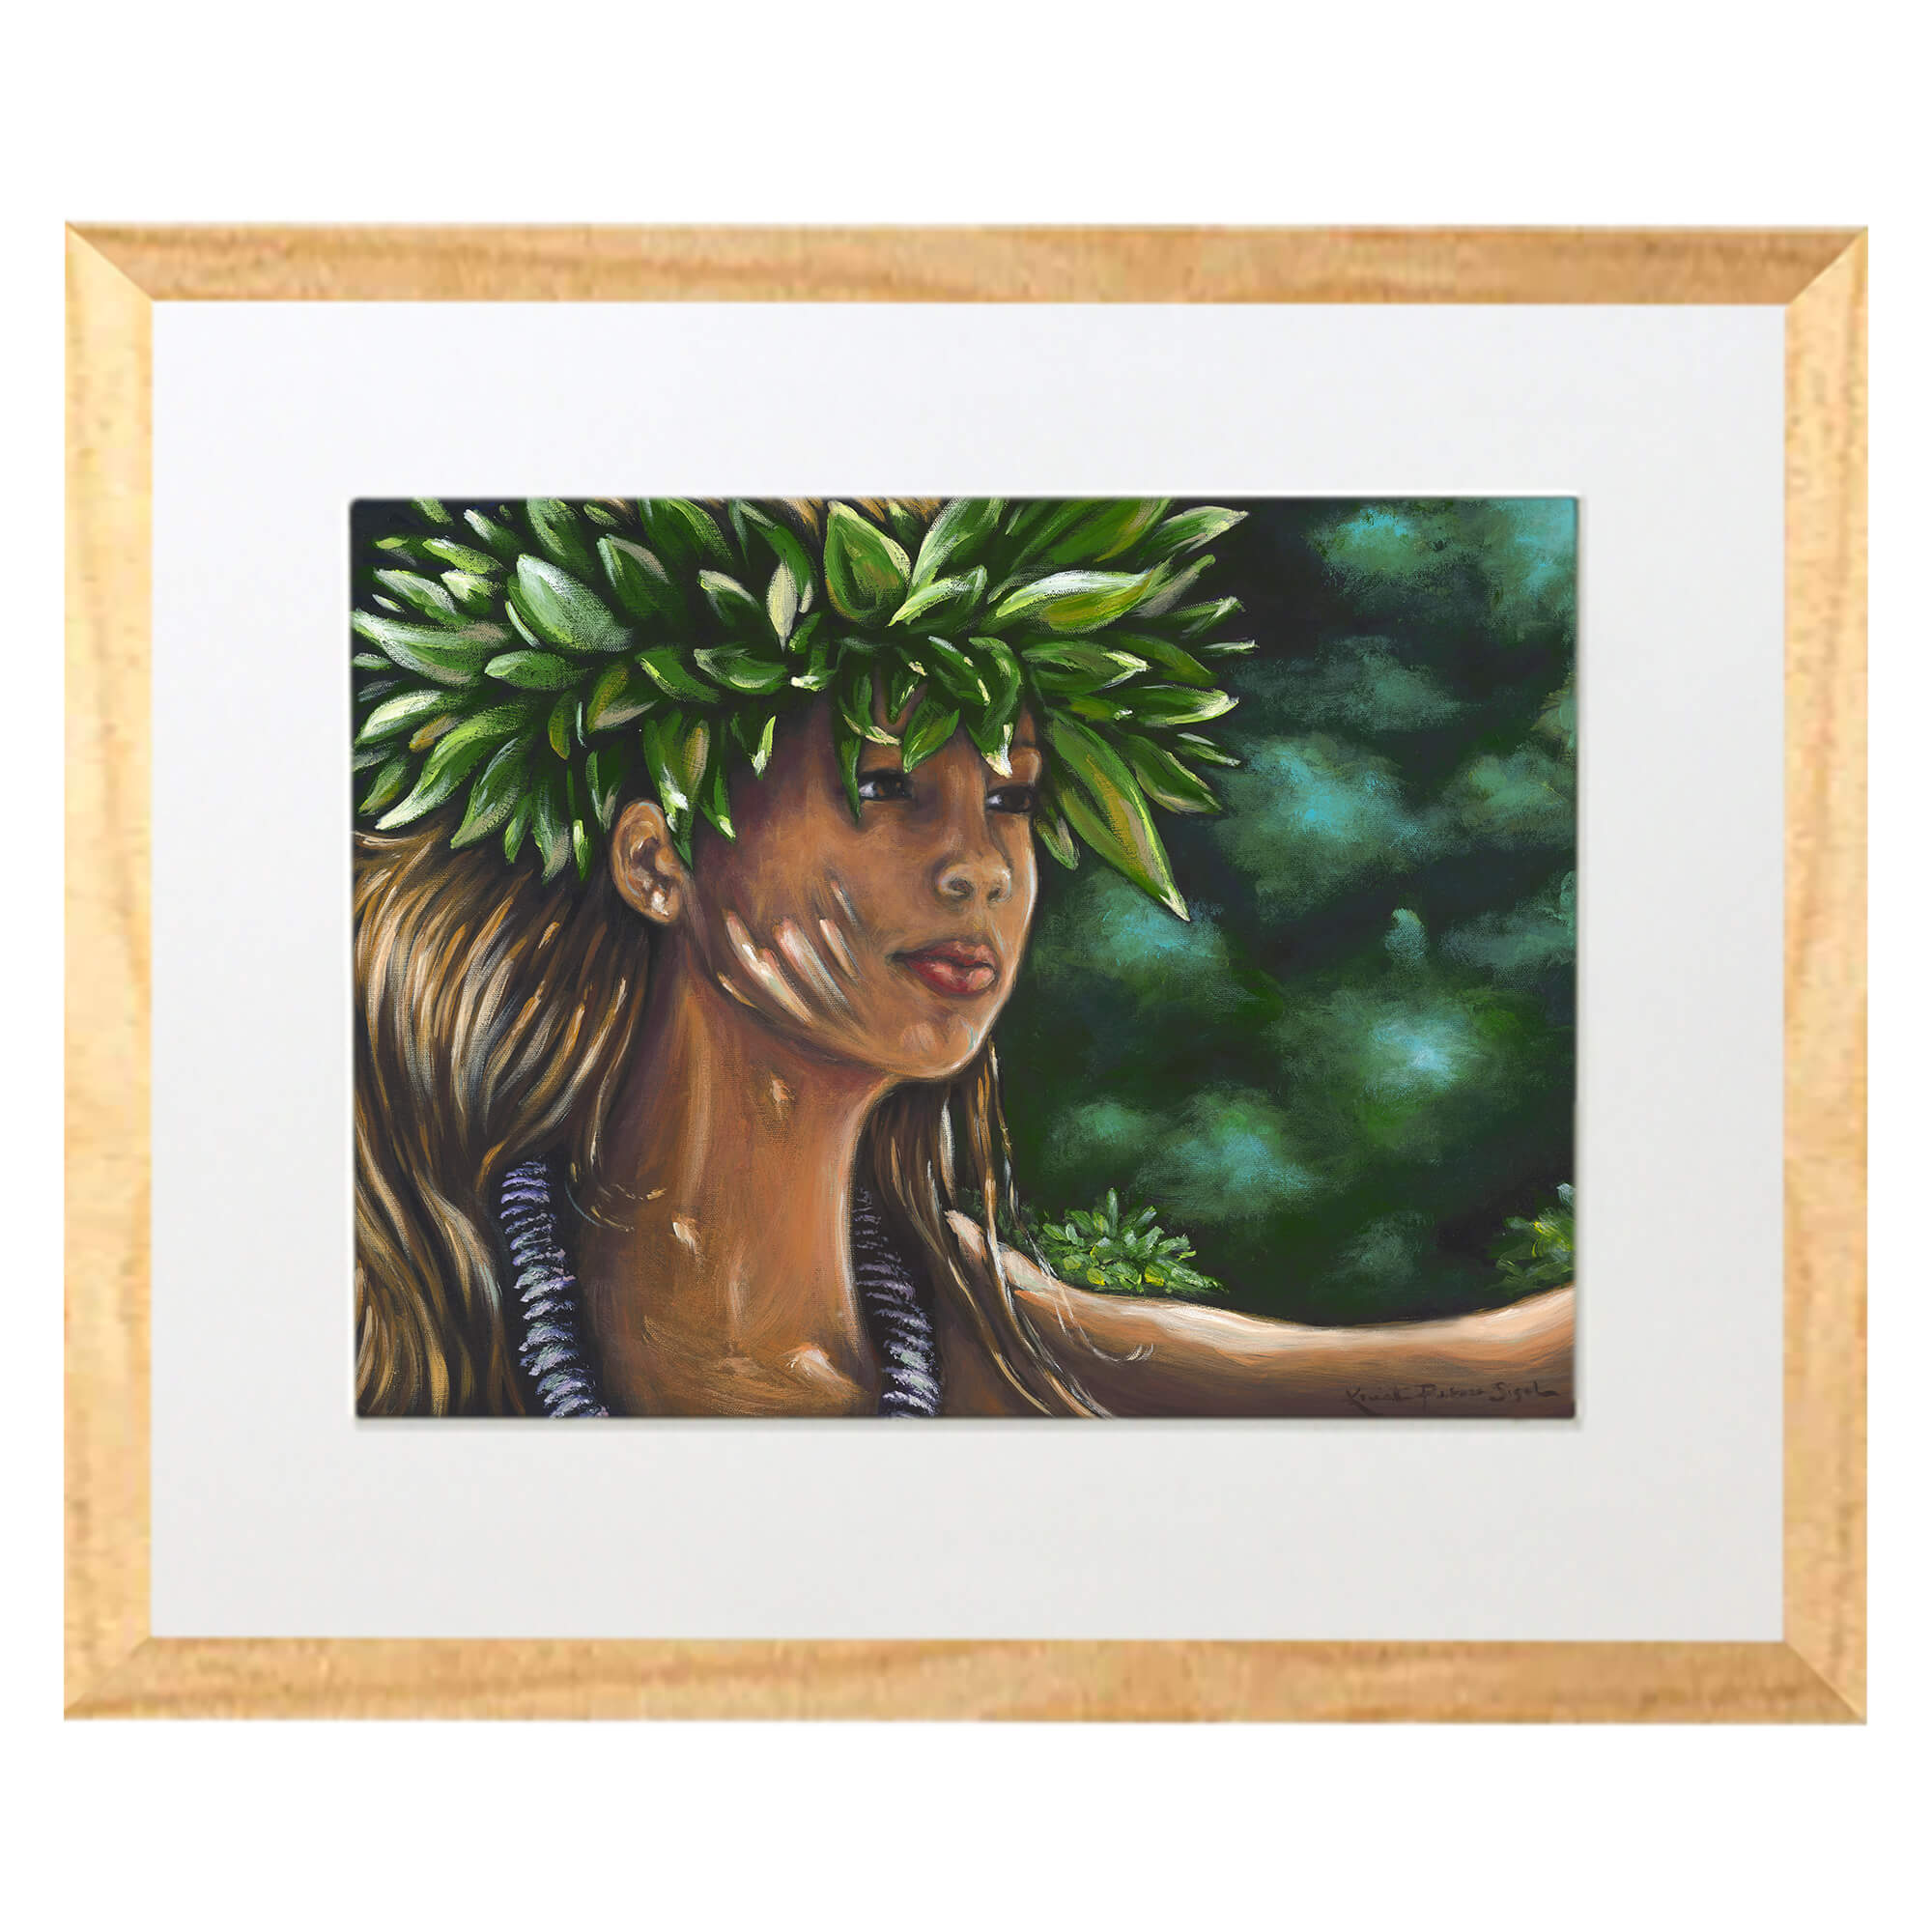 Matted art print with wood frame featuring a necklace by hawaii artist Kristi Petosa